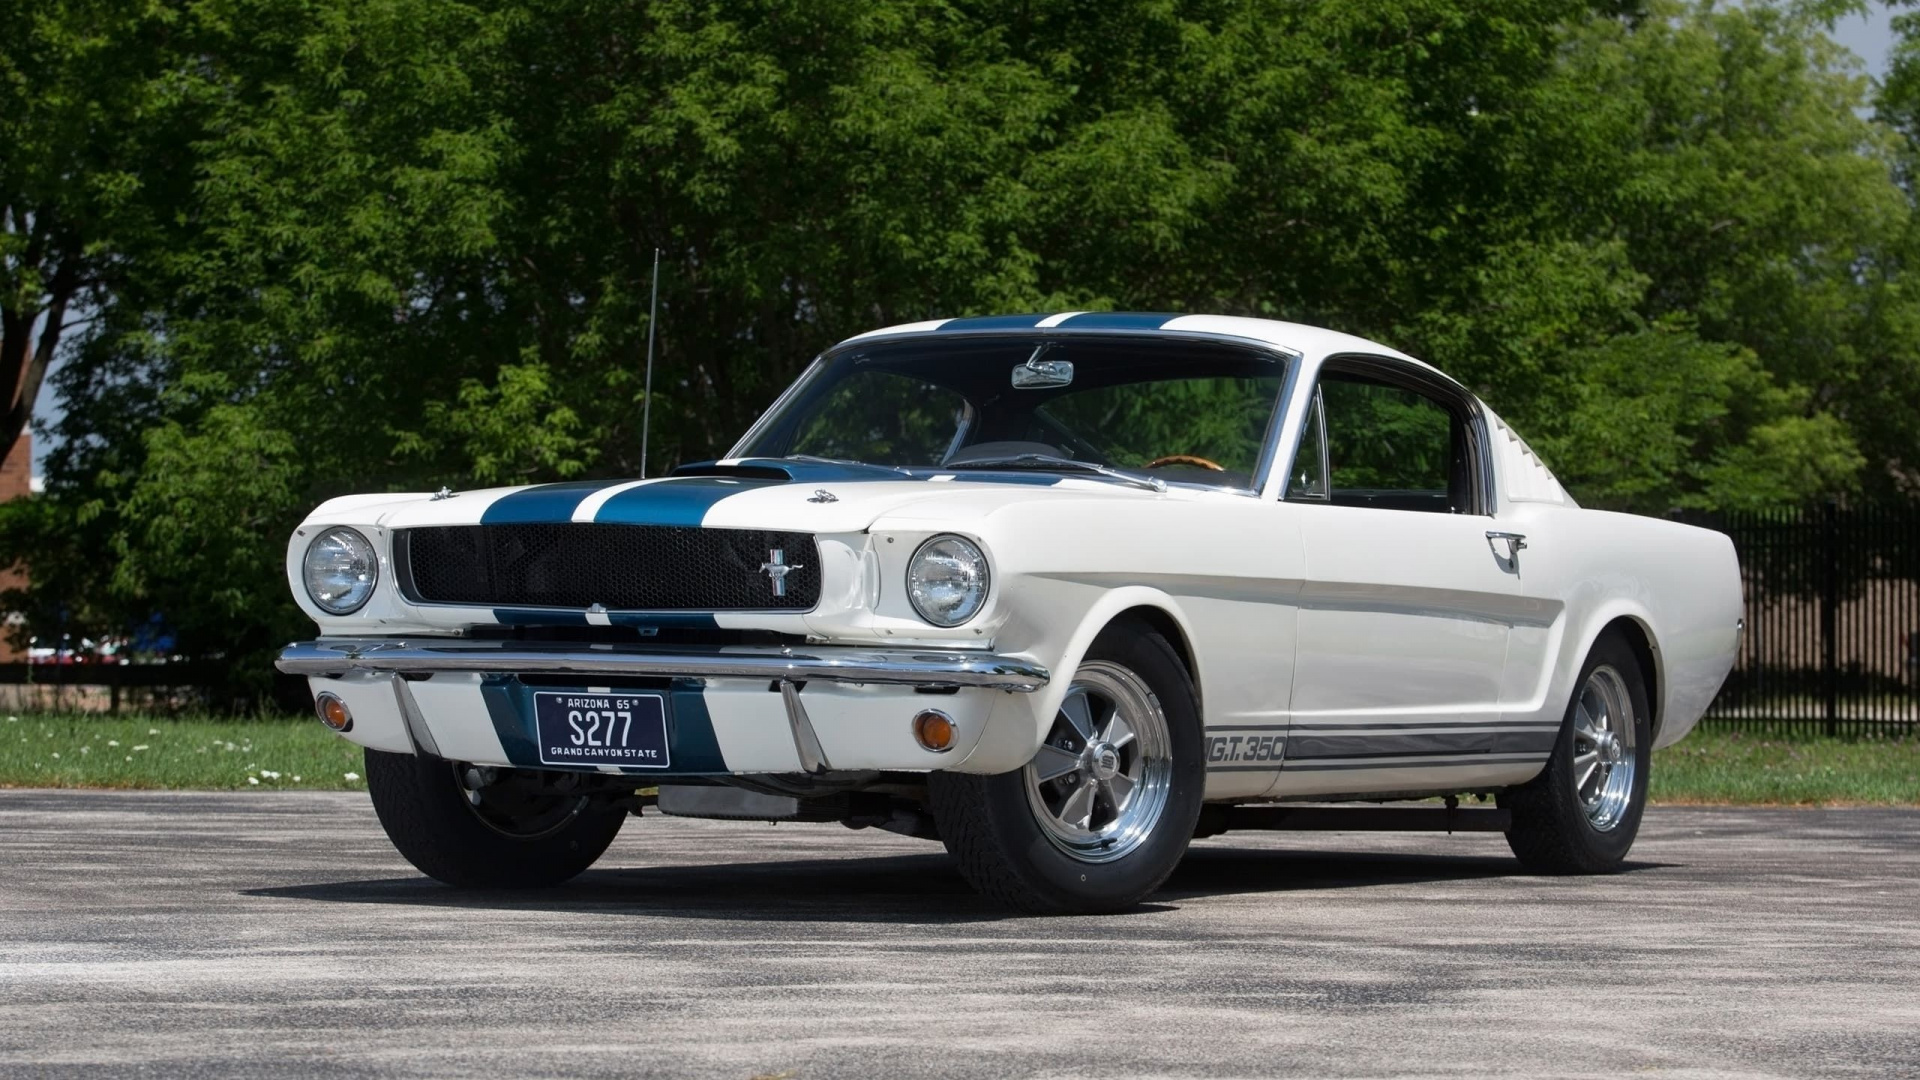 1967 Ford Mustang Shelby Gt350, Sports Lines, Wallpaper - 1965 Ford Mustang Shelby Gt350 Hd - HD Wallpaper 